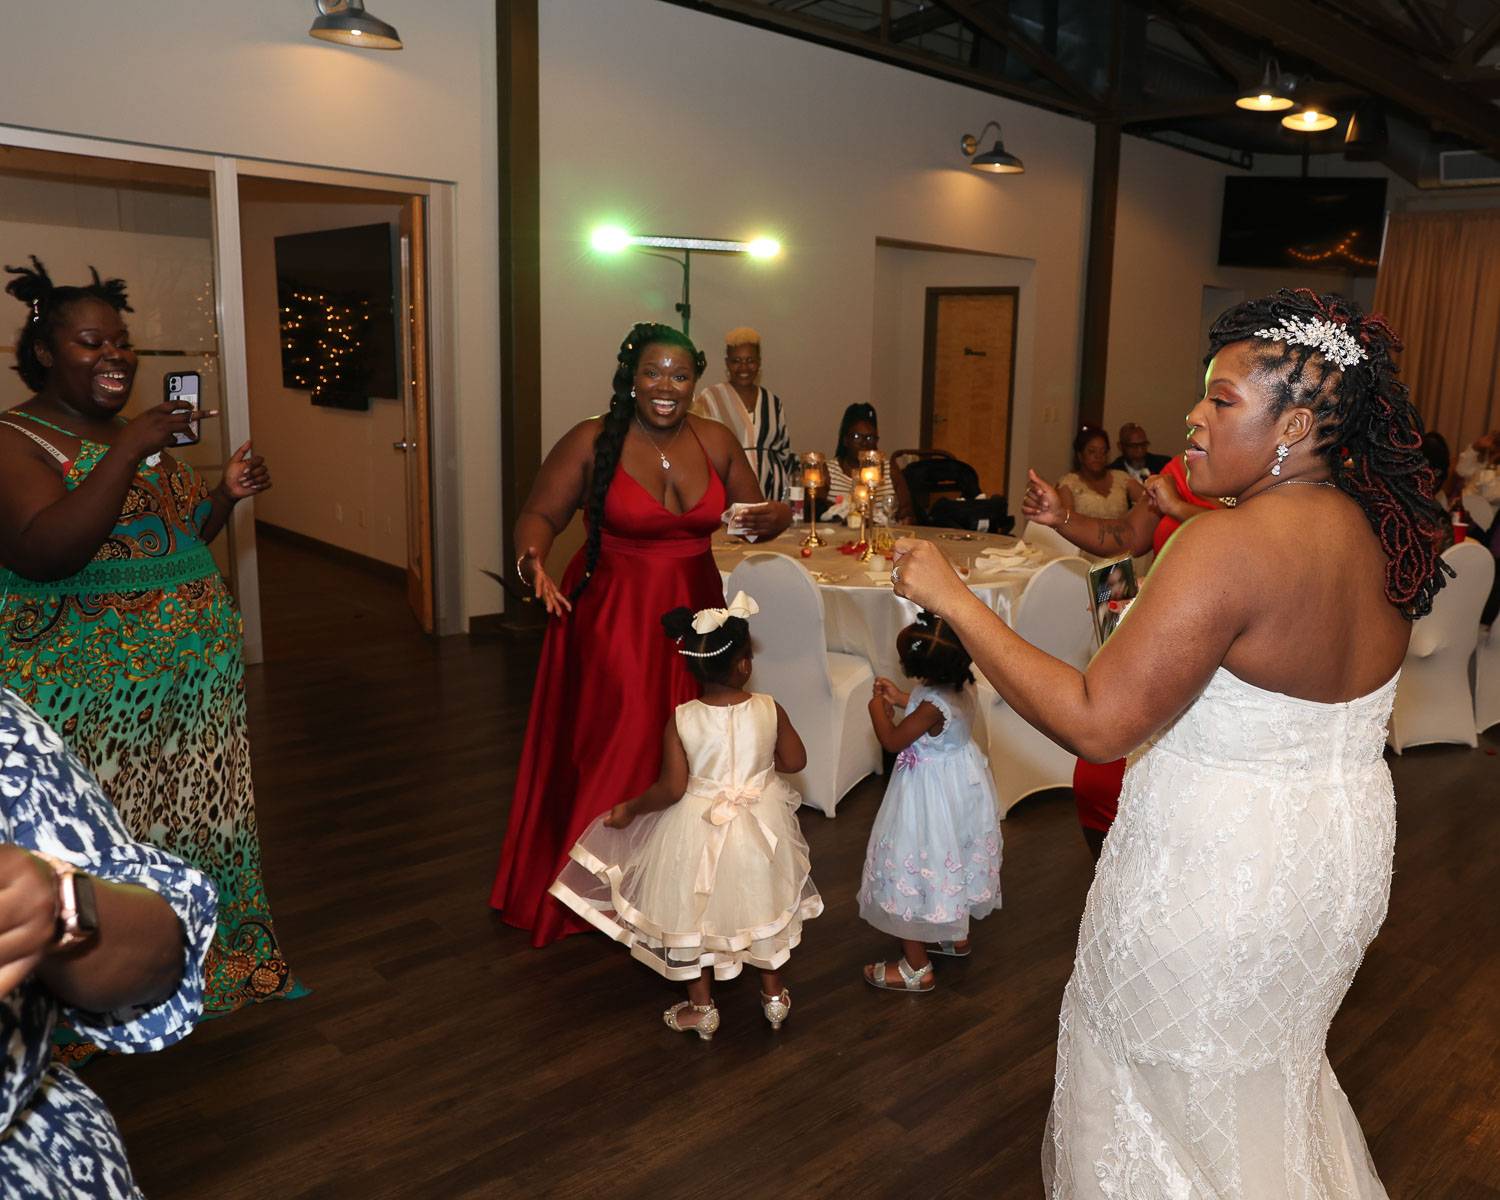 Two young girls dancing with the bridesmaids